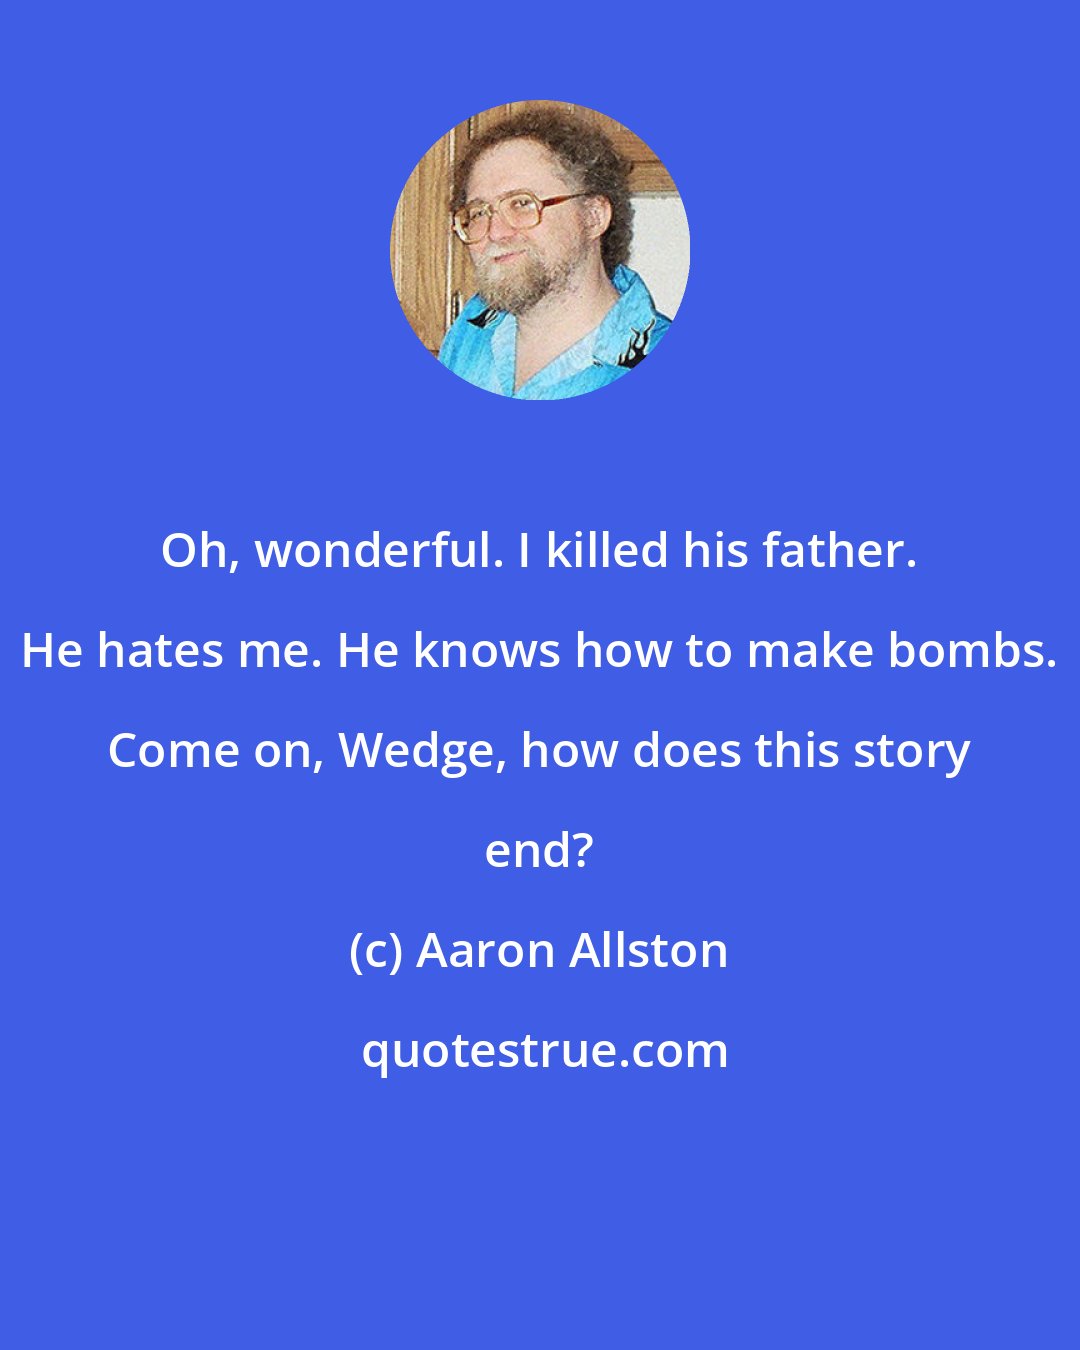 Aaron Allston: Oh, wonderful. I killed his father. He hates me. He knows how to make bombs. Come on, Wedge, how does this story end?